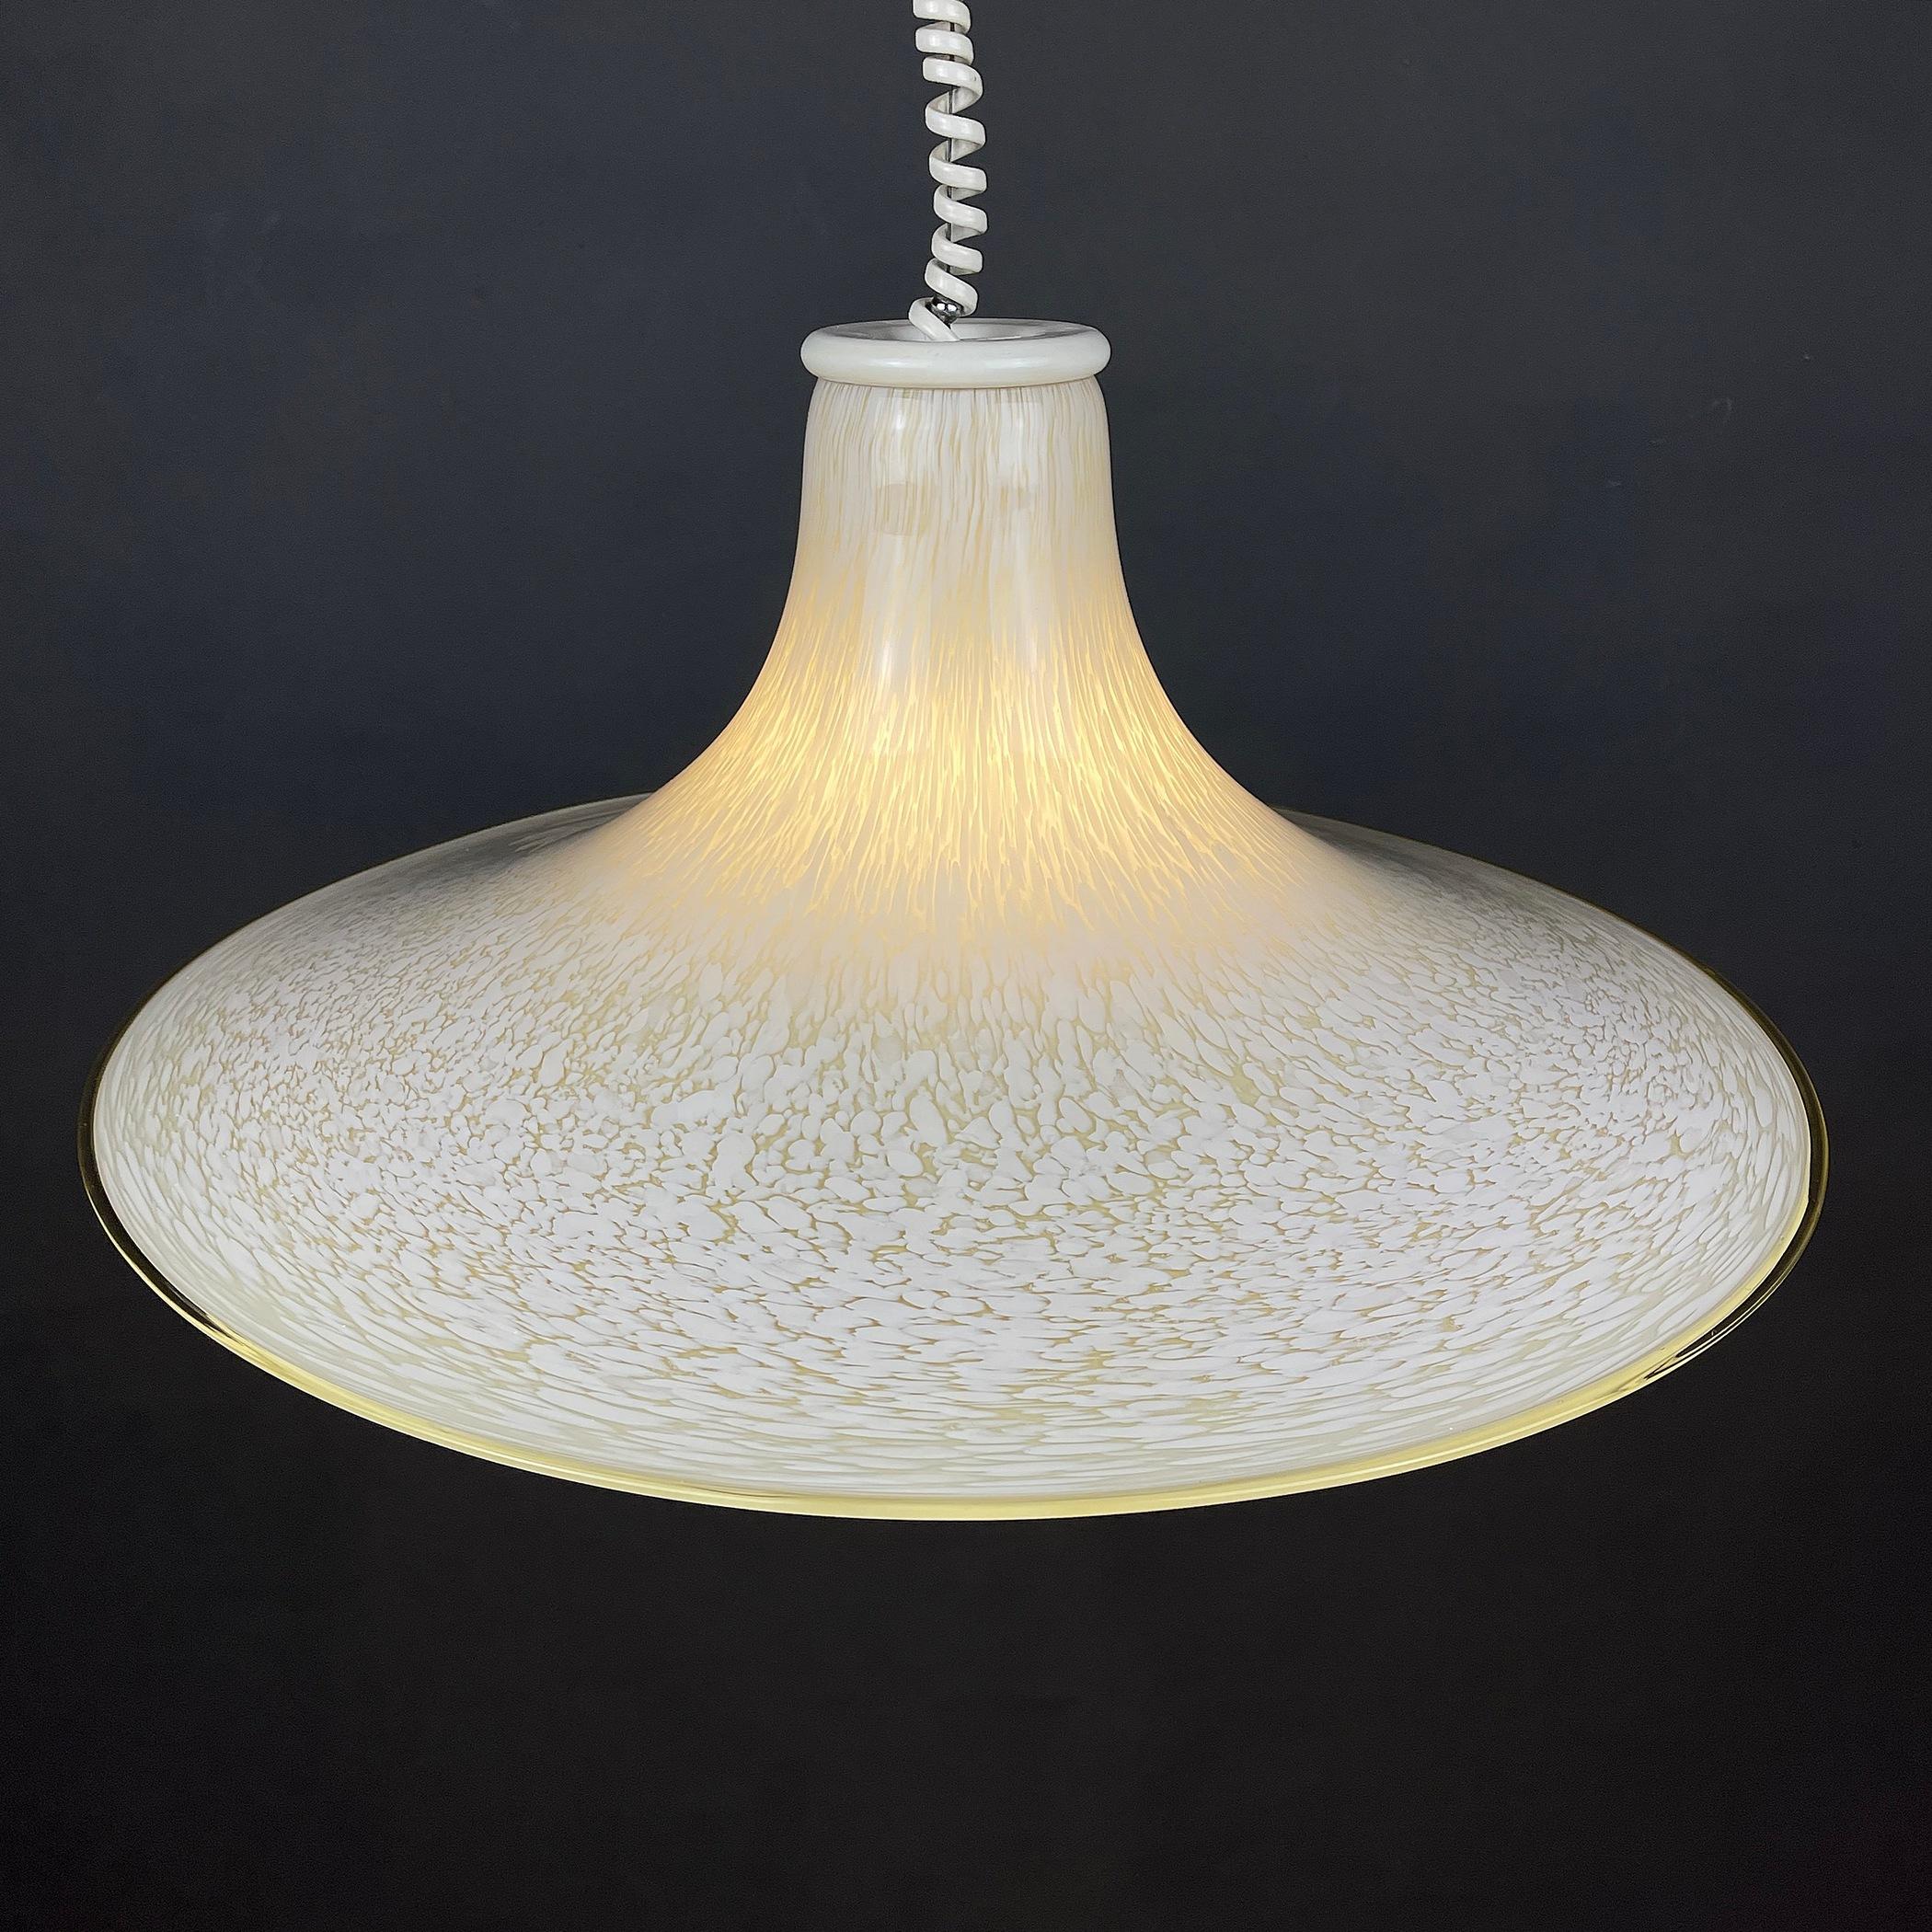 Mid-century beige Murano glass pendant lamp Murano Venice, Italy 1970s. A hand-blown murano lamp is a real work of art. Excellent vintage condition! Max height with cable 120 cm. Chandelier weight 5.5 kg. Bulb E 27 required. Suitable for all